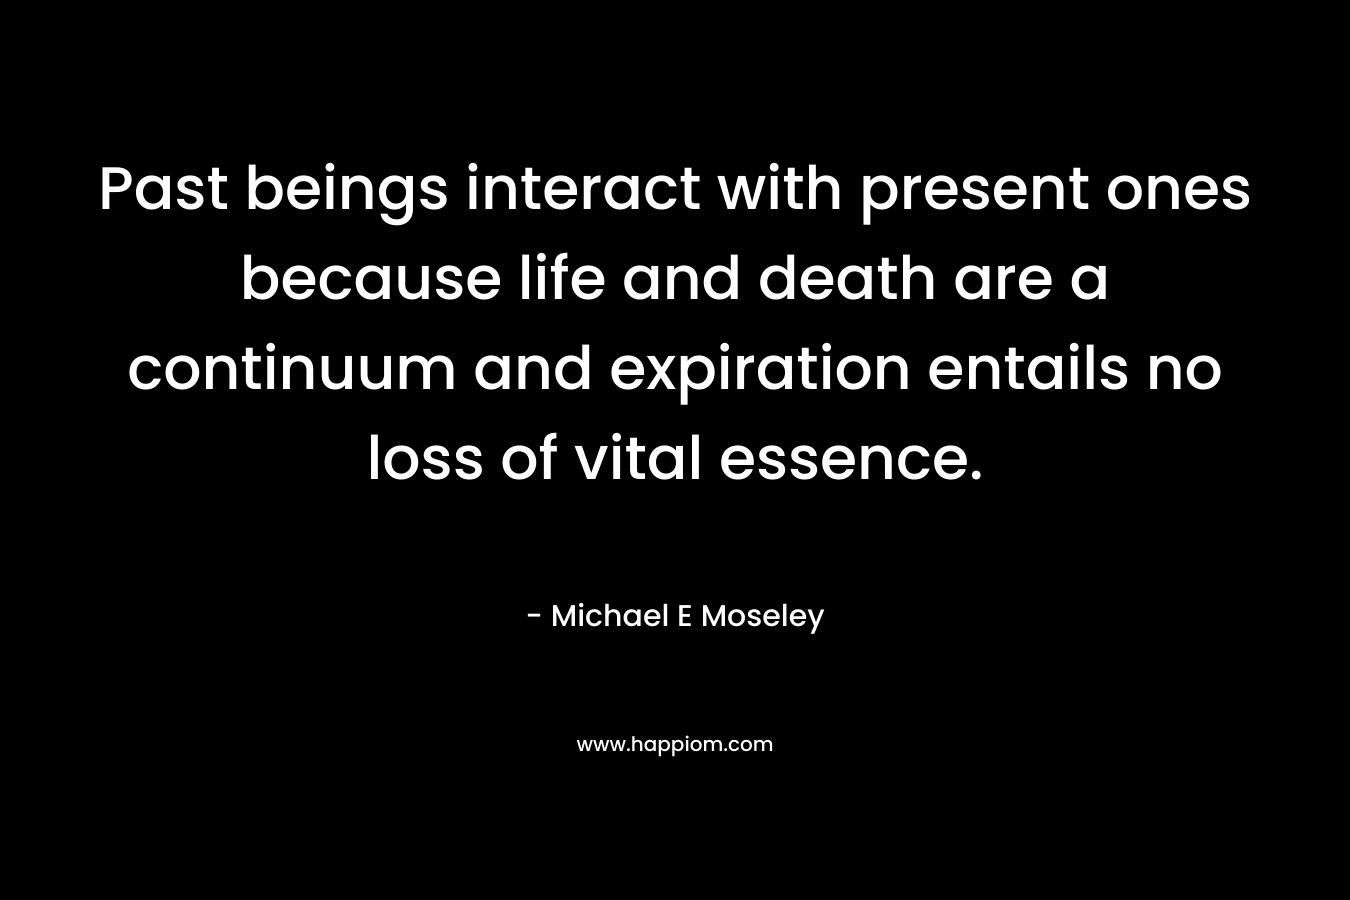 Past beings interact with present ones because life and death are a continuum and expiration entails no loss of vital essence. – Michael E Moseley